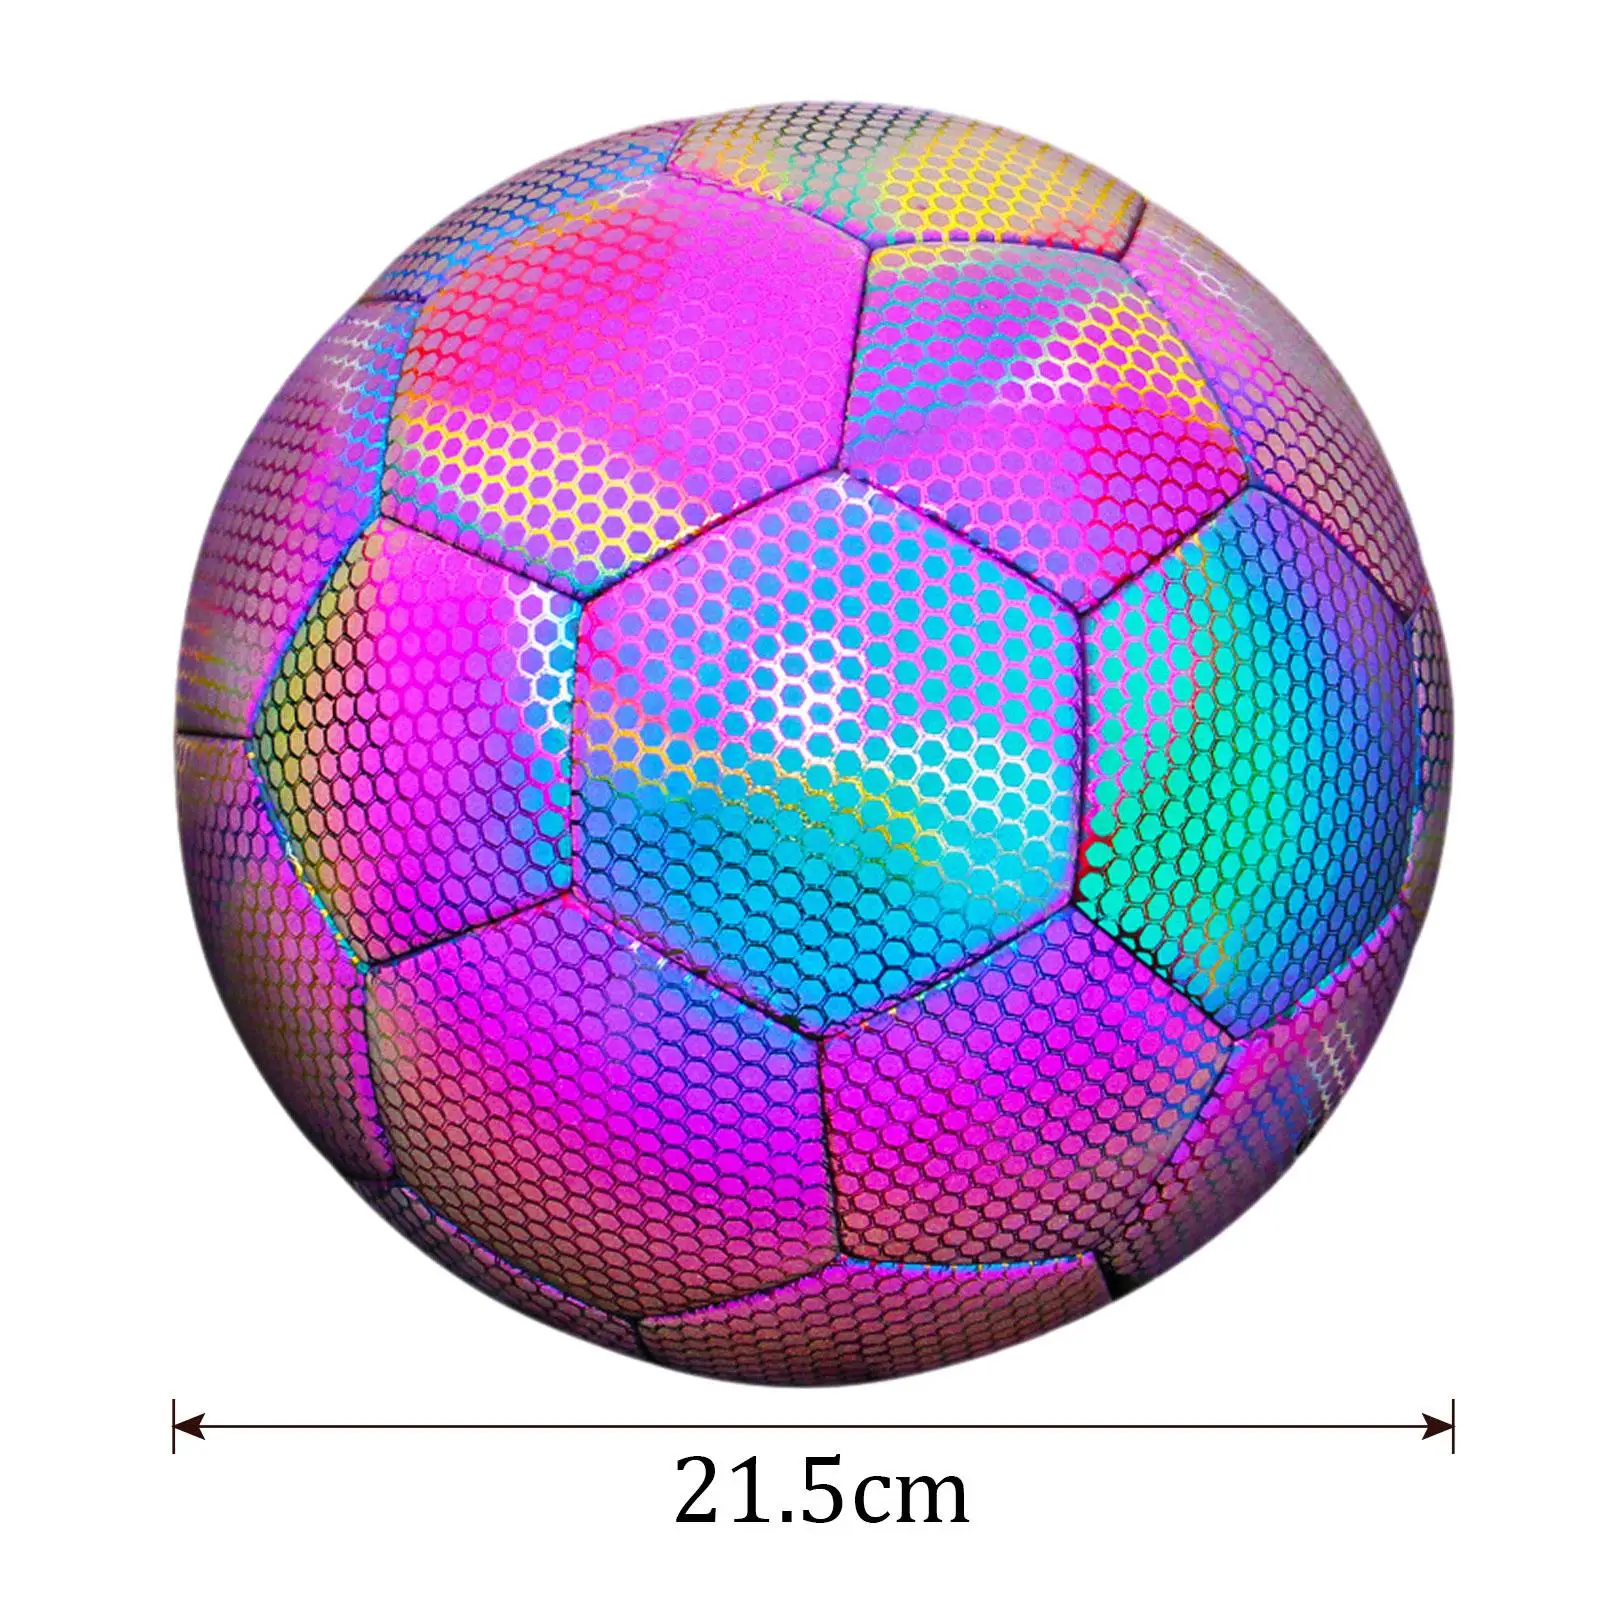 Soccer Ball Reflective Holographic Teens PU Leather Football Outdoors Sports